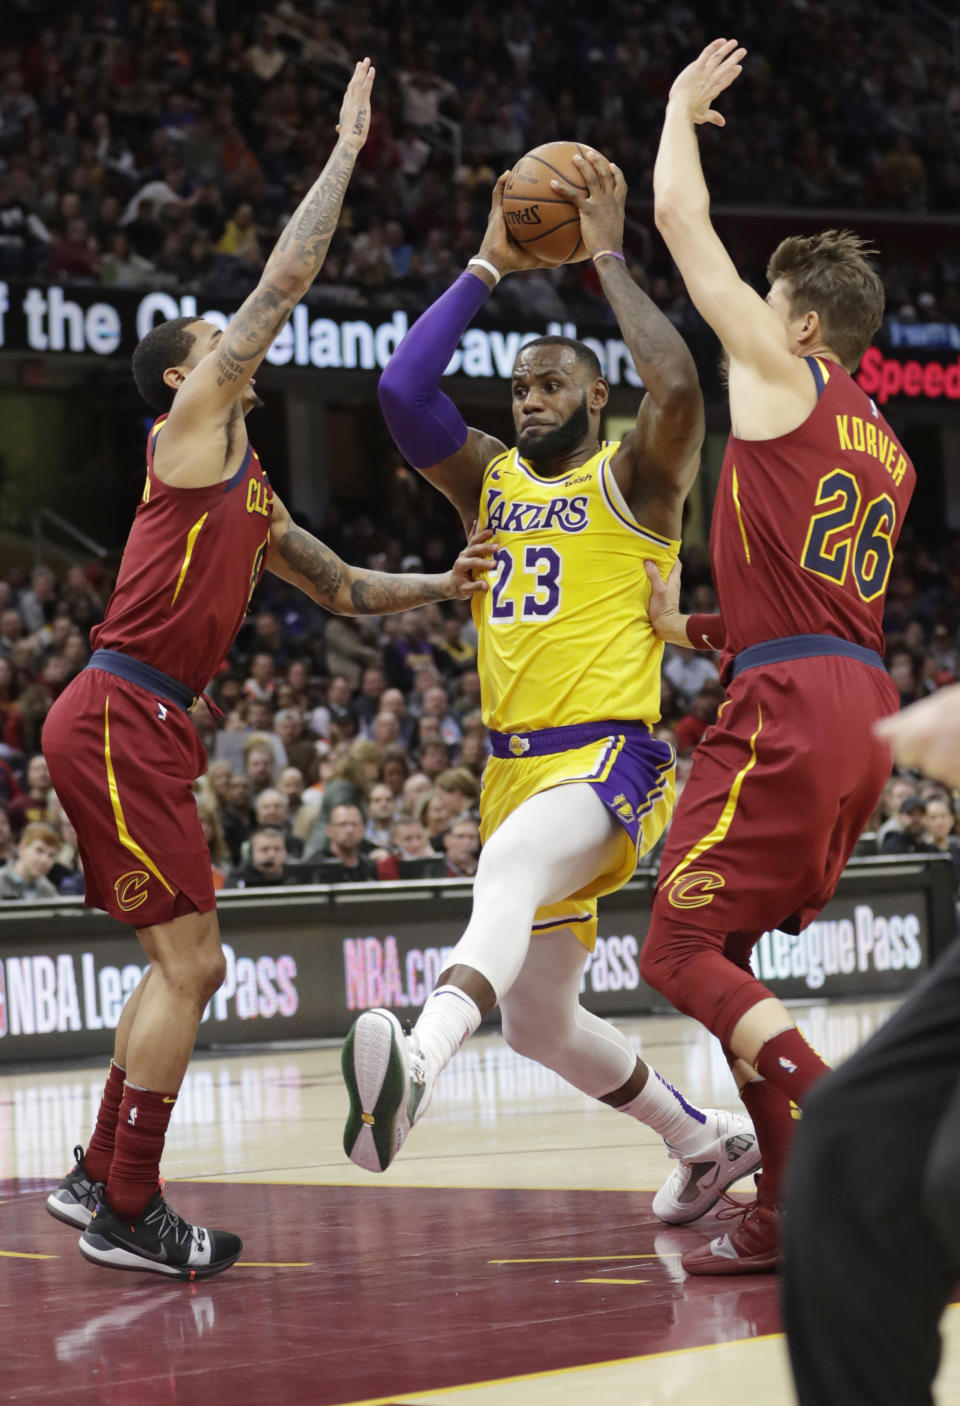 Los Angeles Lakers' LeBron James (23) drives between Cleveland Cavaliers' Jordan Clarkson, left, and Kyle Korver (26) during the second half of an NBA basketball game Wednesday, Nov. 21, 2018, in Cleveland. The Lakers won 109-105. (AP Photo/Tony Dejak)